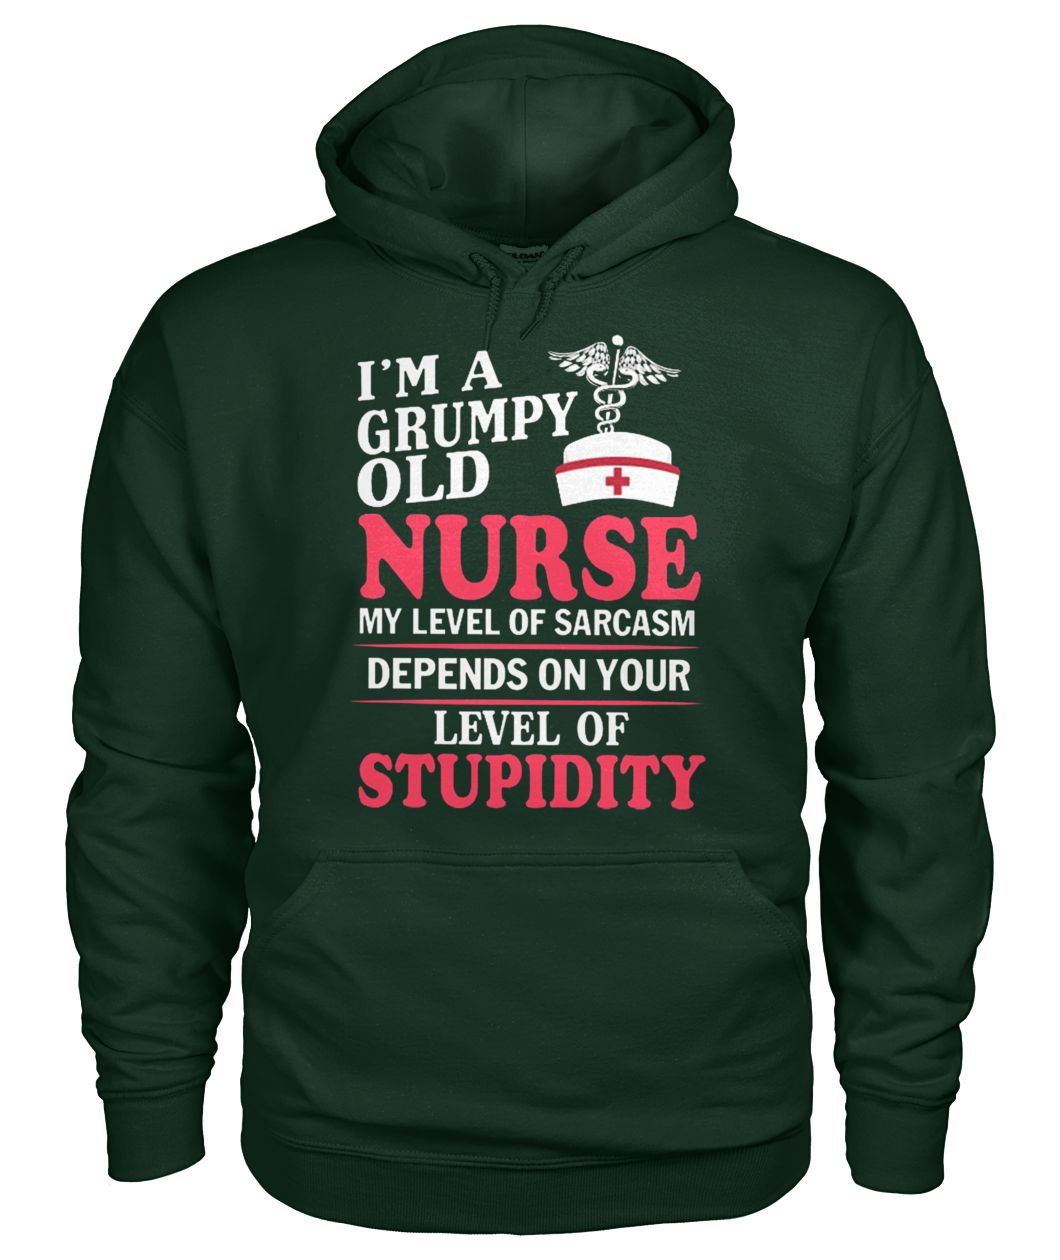 I’m a grumpy old nurse my level of sarcasm depends on your level of stupidity gildan hoodie